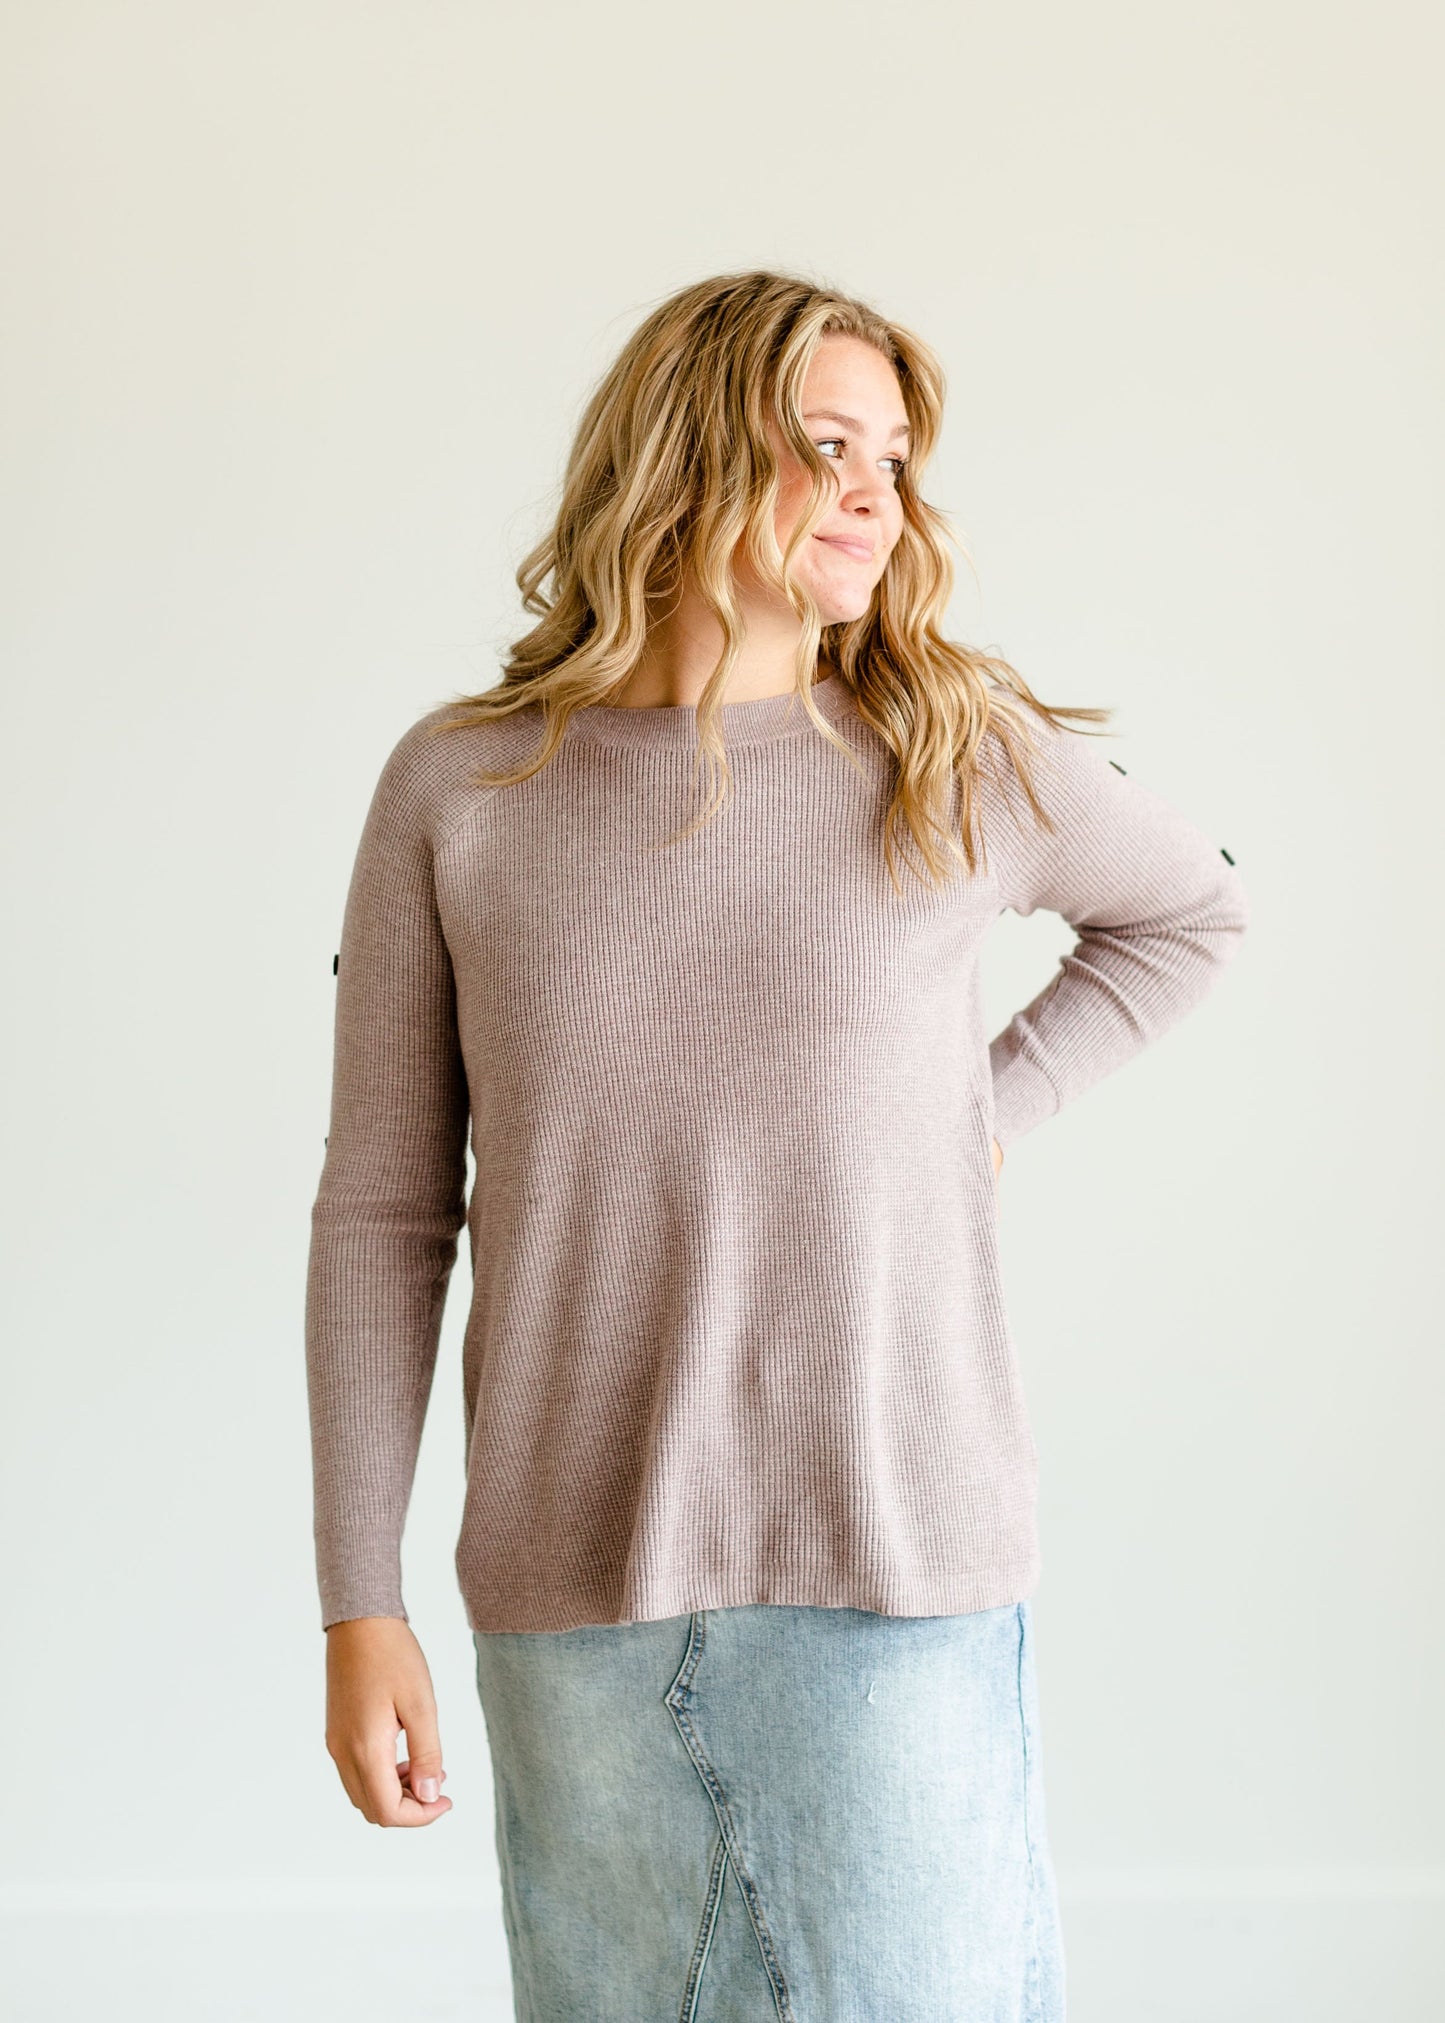 Waffle Knit Sleeve Button Crew Neck Sweater Tops